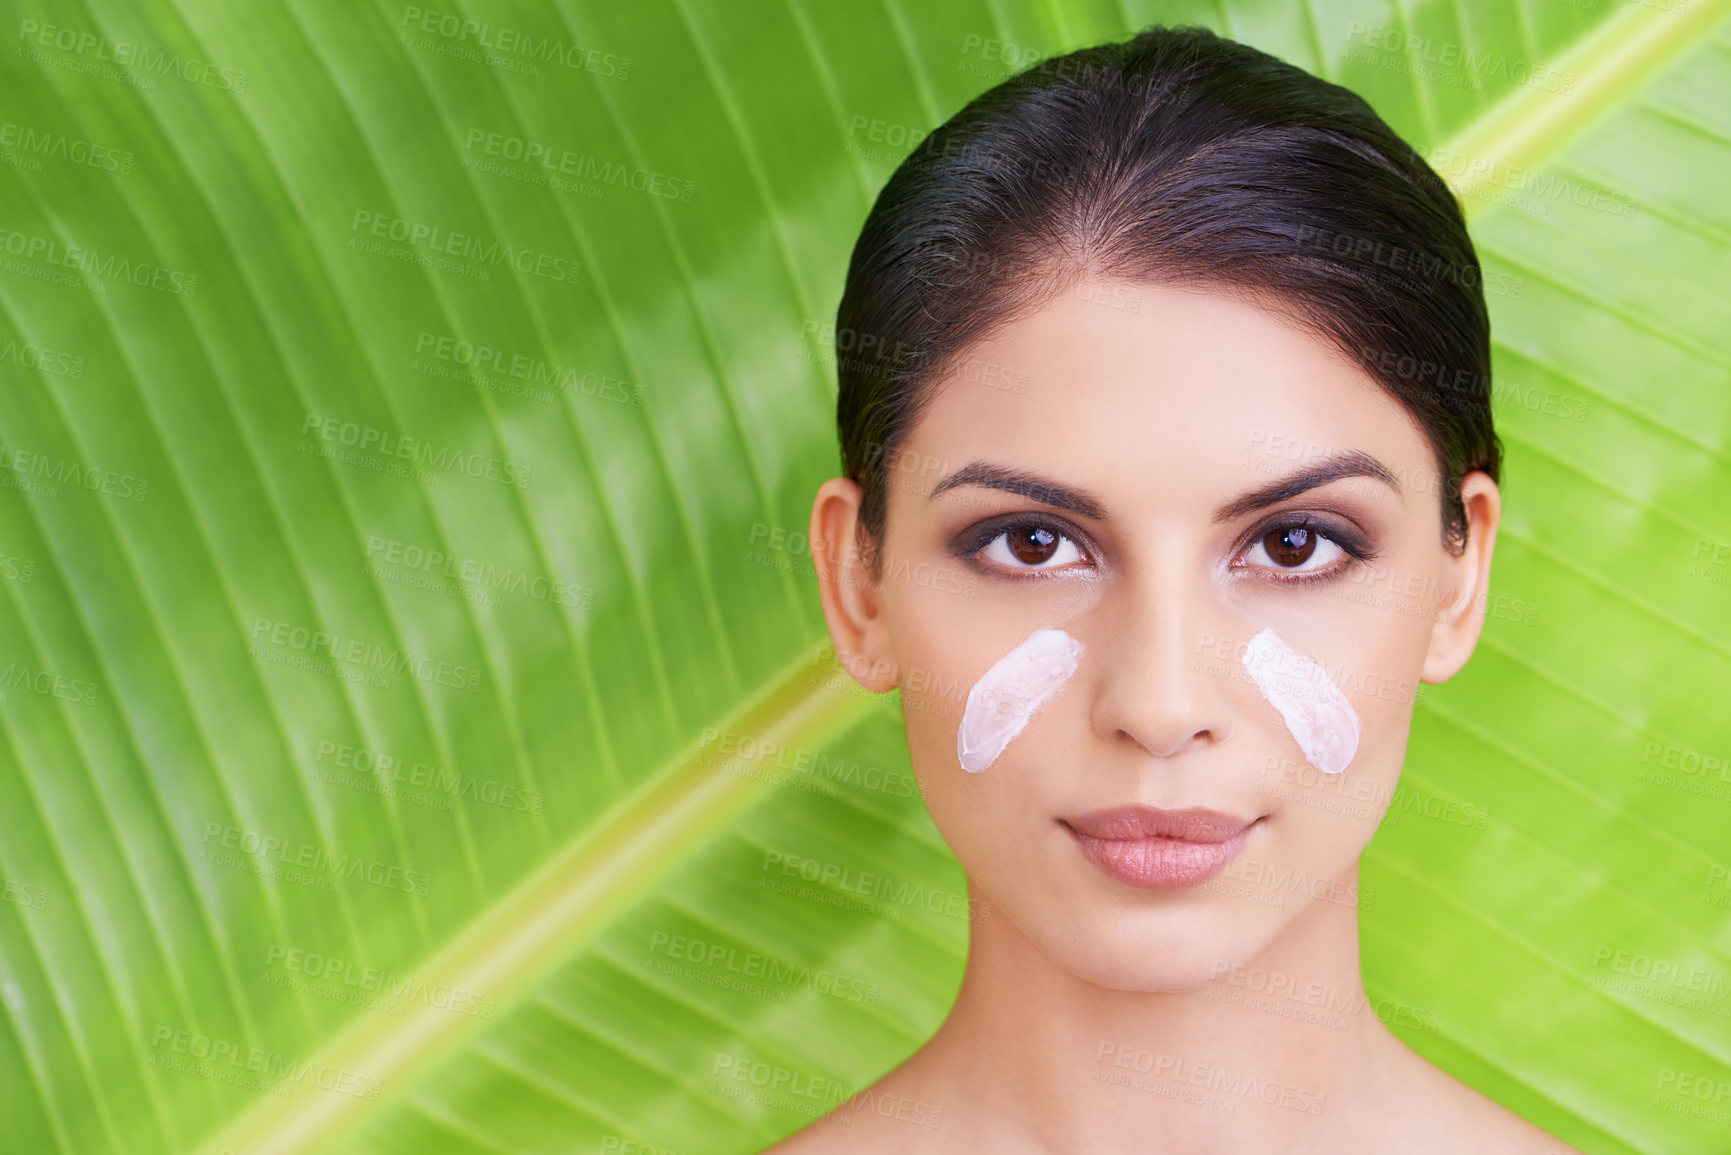 Buy stock photo Studio portrait of a beautiful young woman with moisturizer on her face posing in front of a leaf